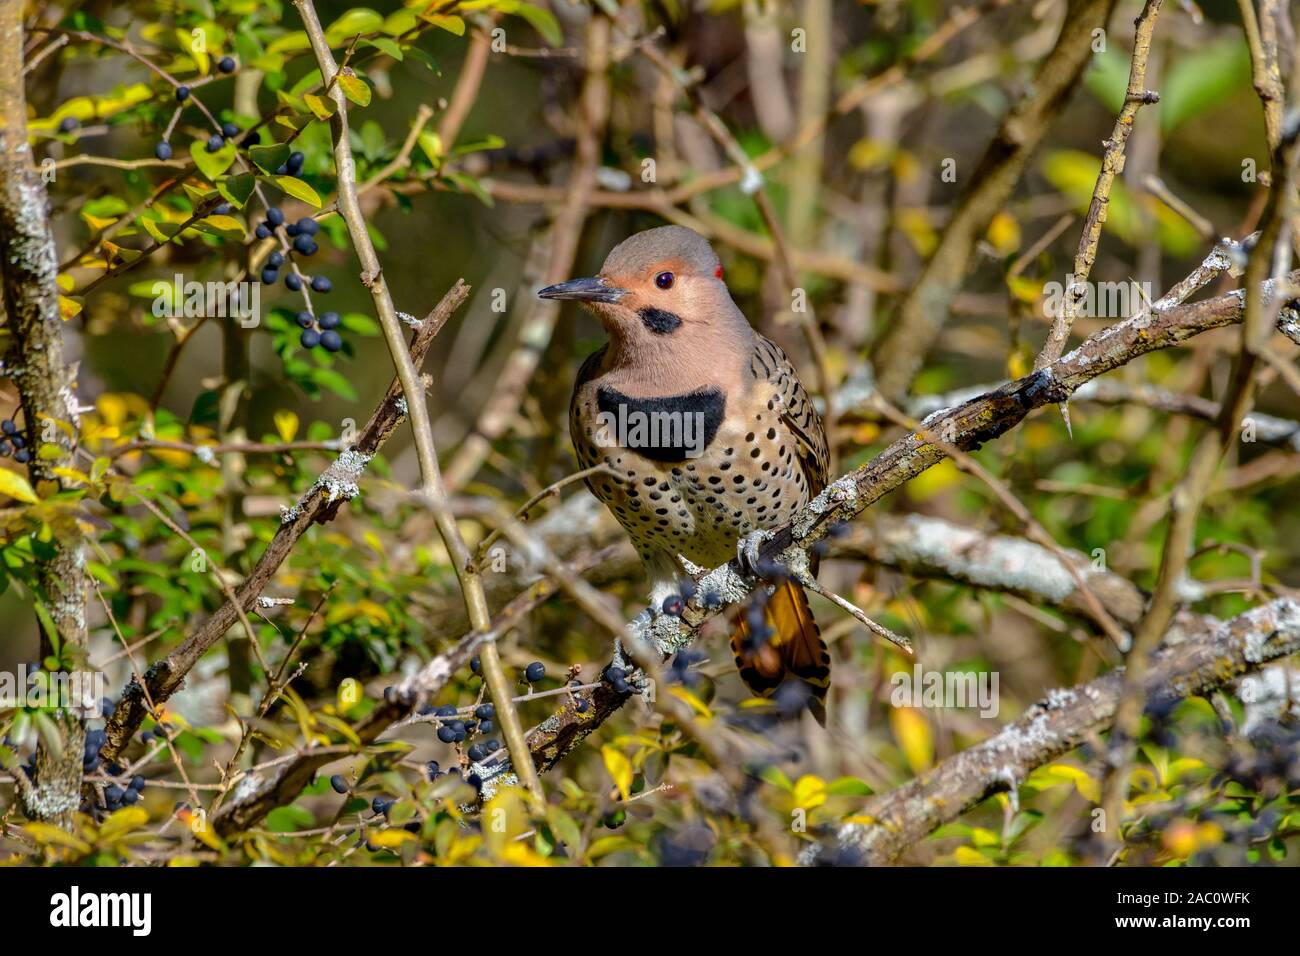 Northern Flicker - Colaptes auratus - Yellow-shafted, perched on a branch detailed close-up Stock Photo